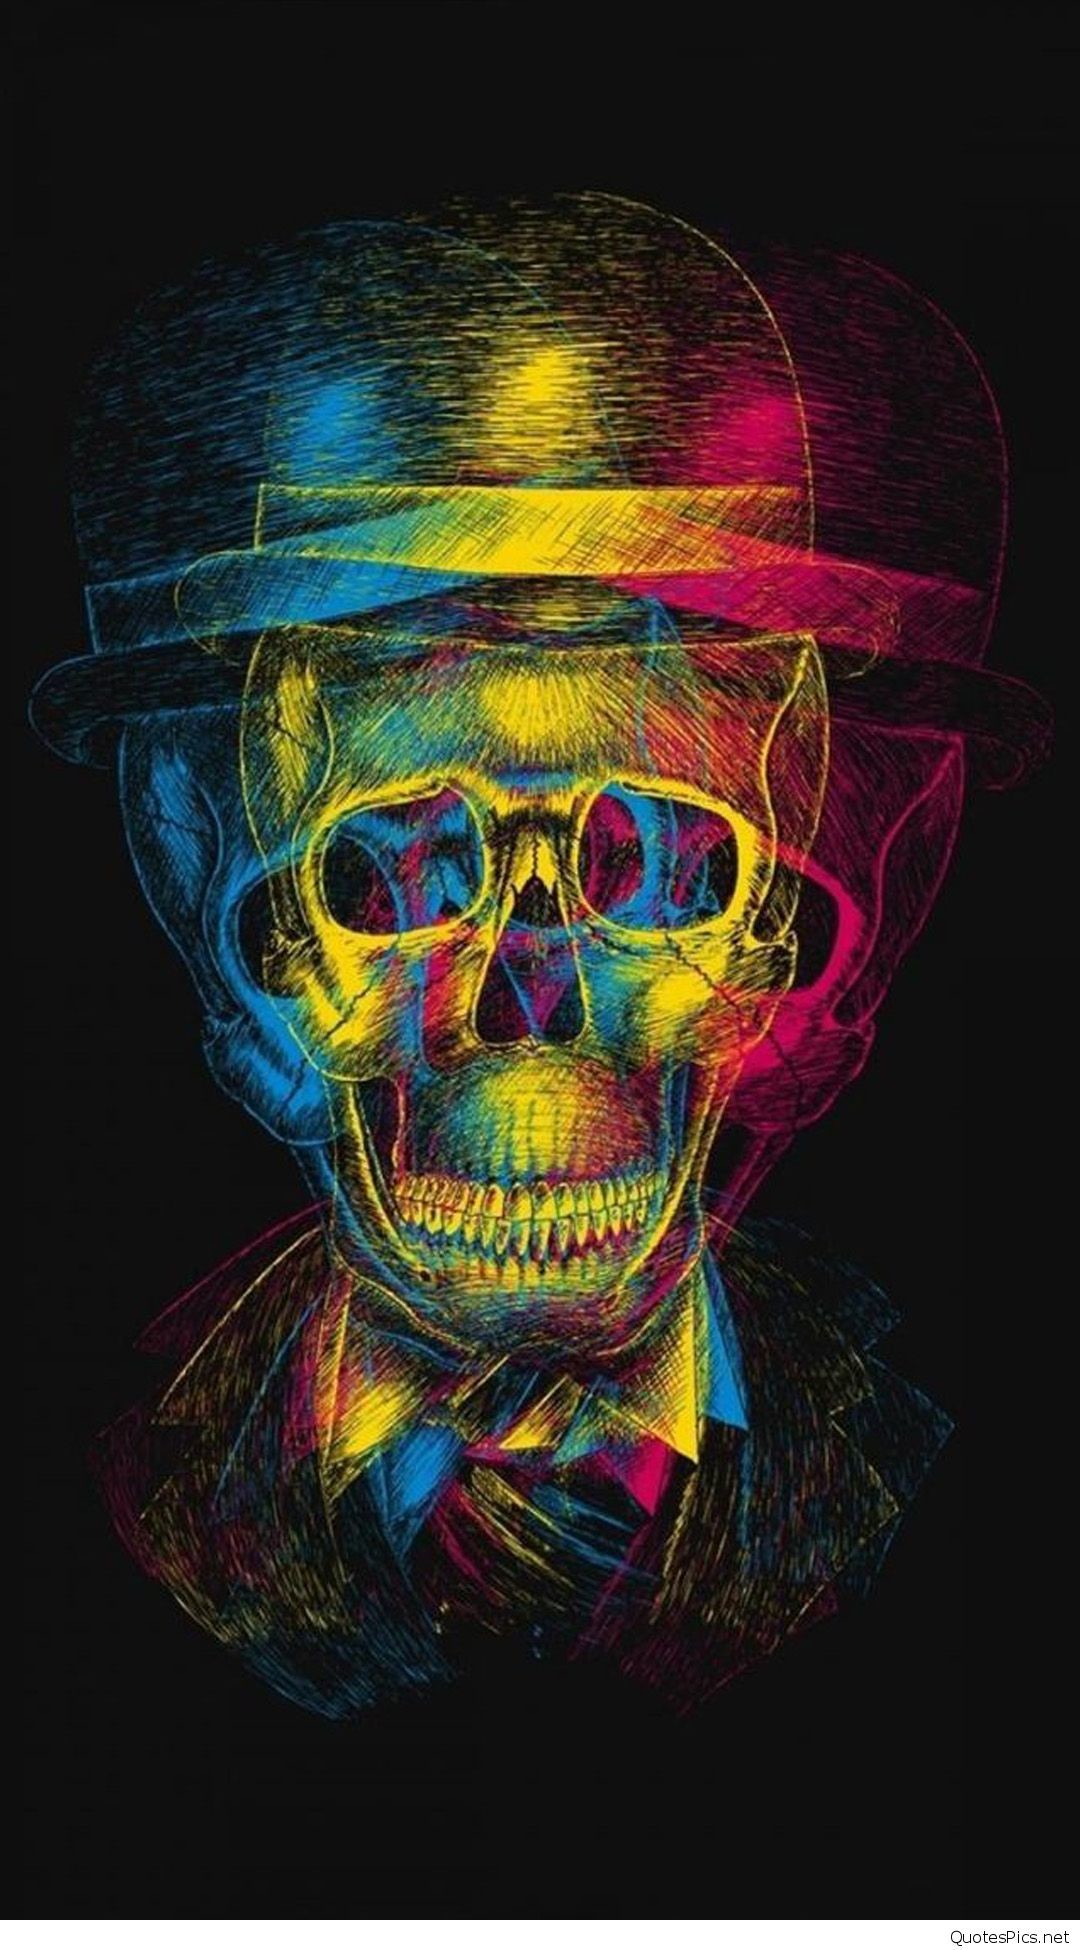 Colorful Overlapping Skull Art iPhone 6 plus wallpaper